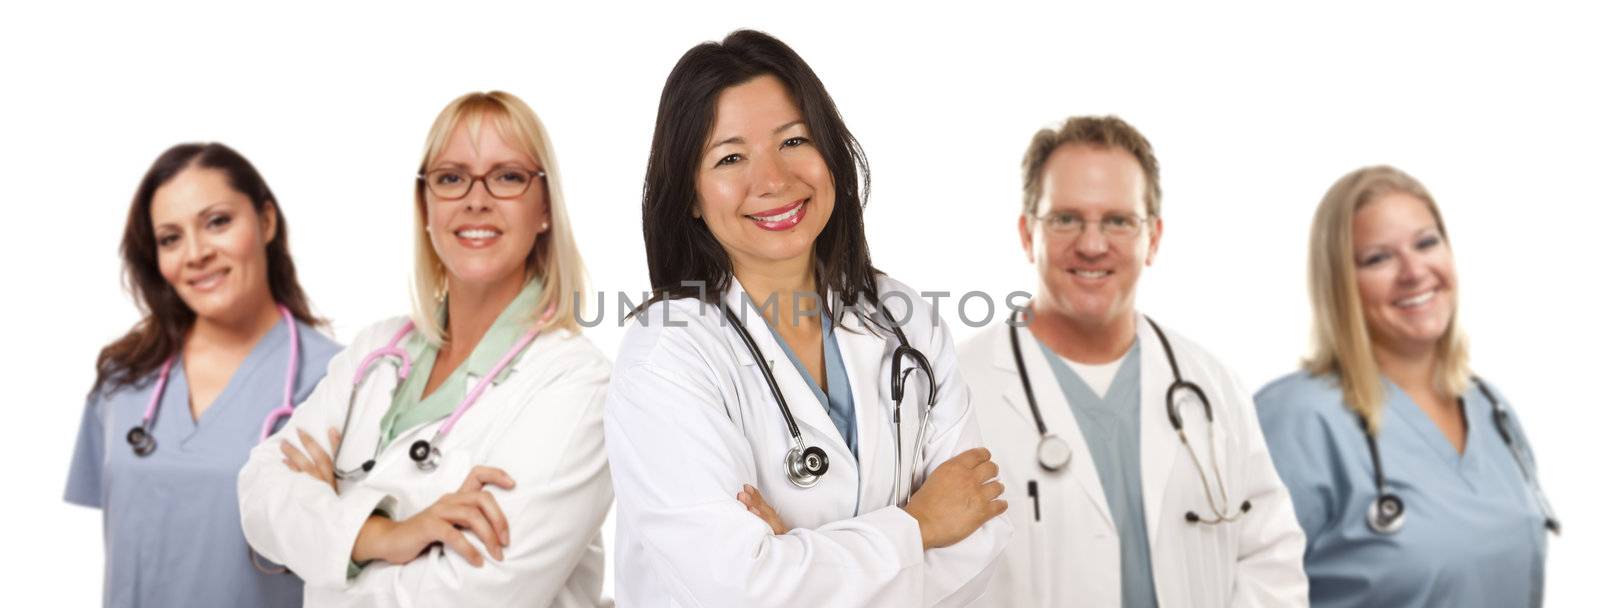 Hispanic Female Doctor and Colleagues by Feverpitched